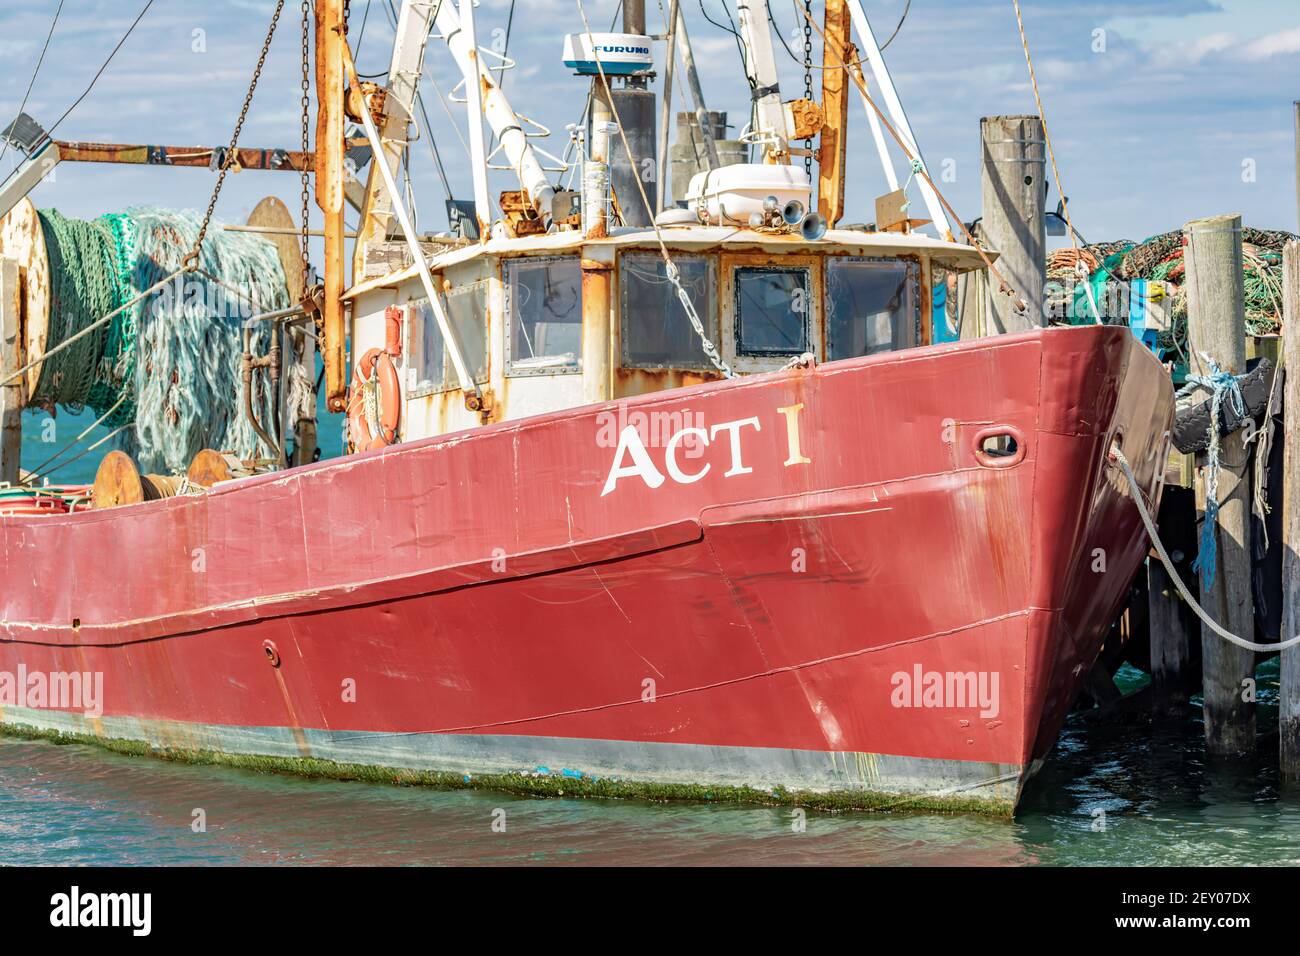 Detail image of the commercial fishing vessel Act 1, Montauk, NY Stock Photo